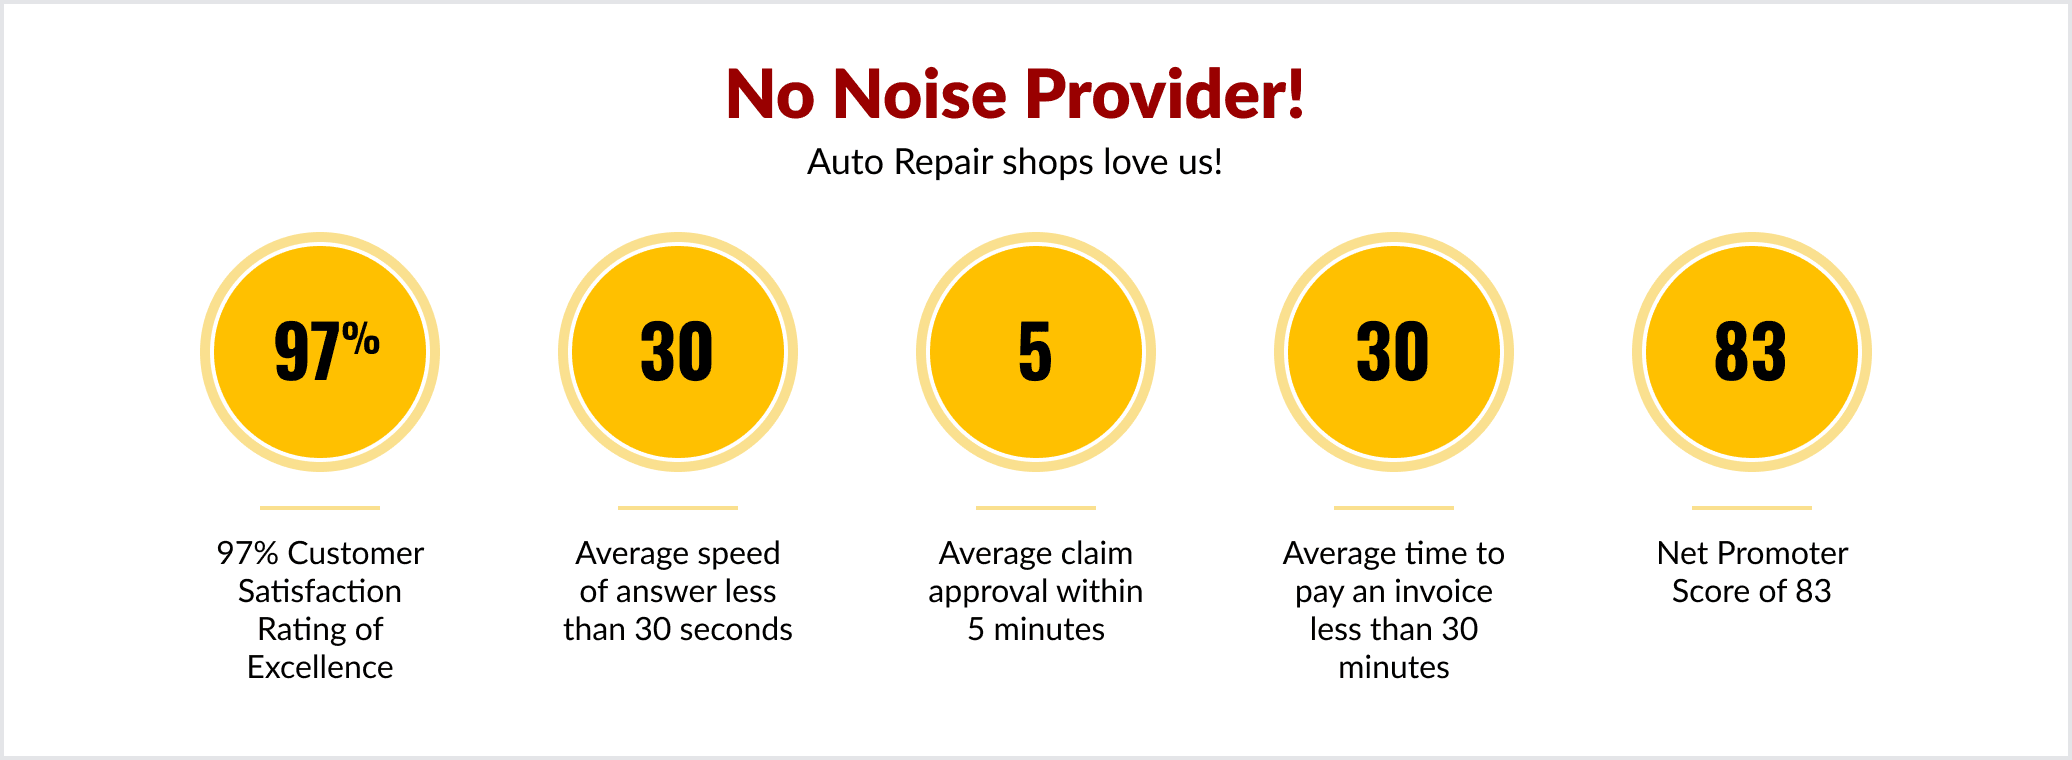 No Noise Mechanical Protection Infographic